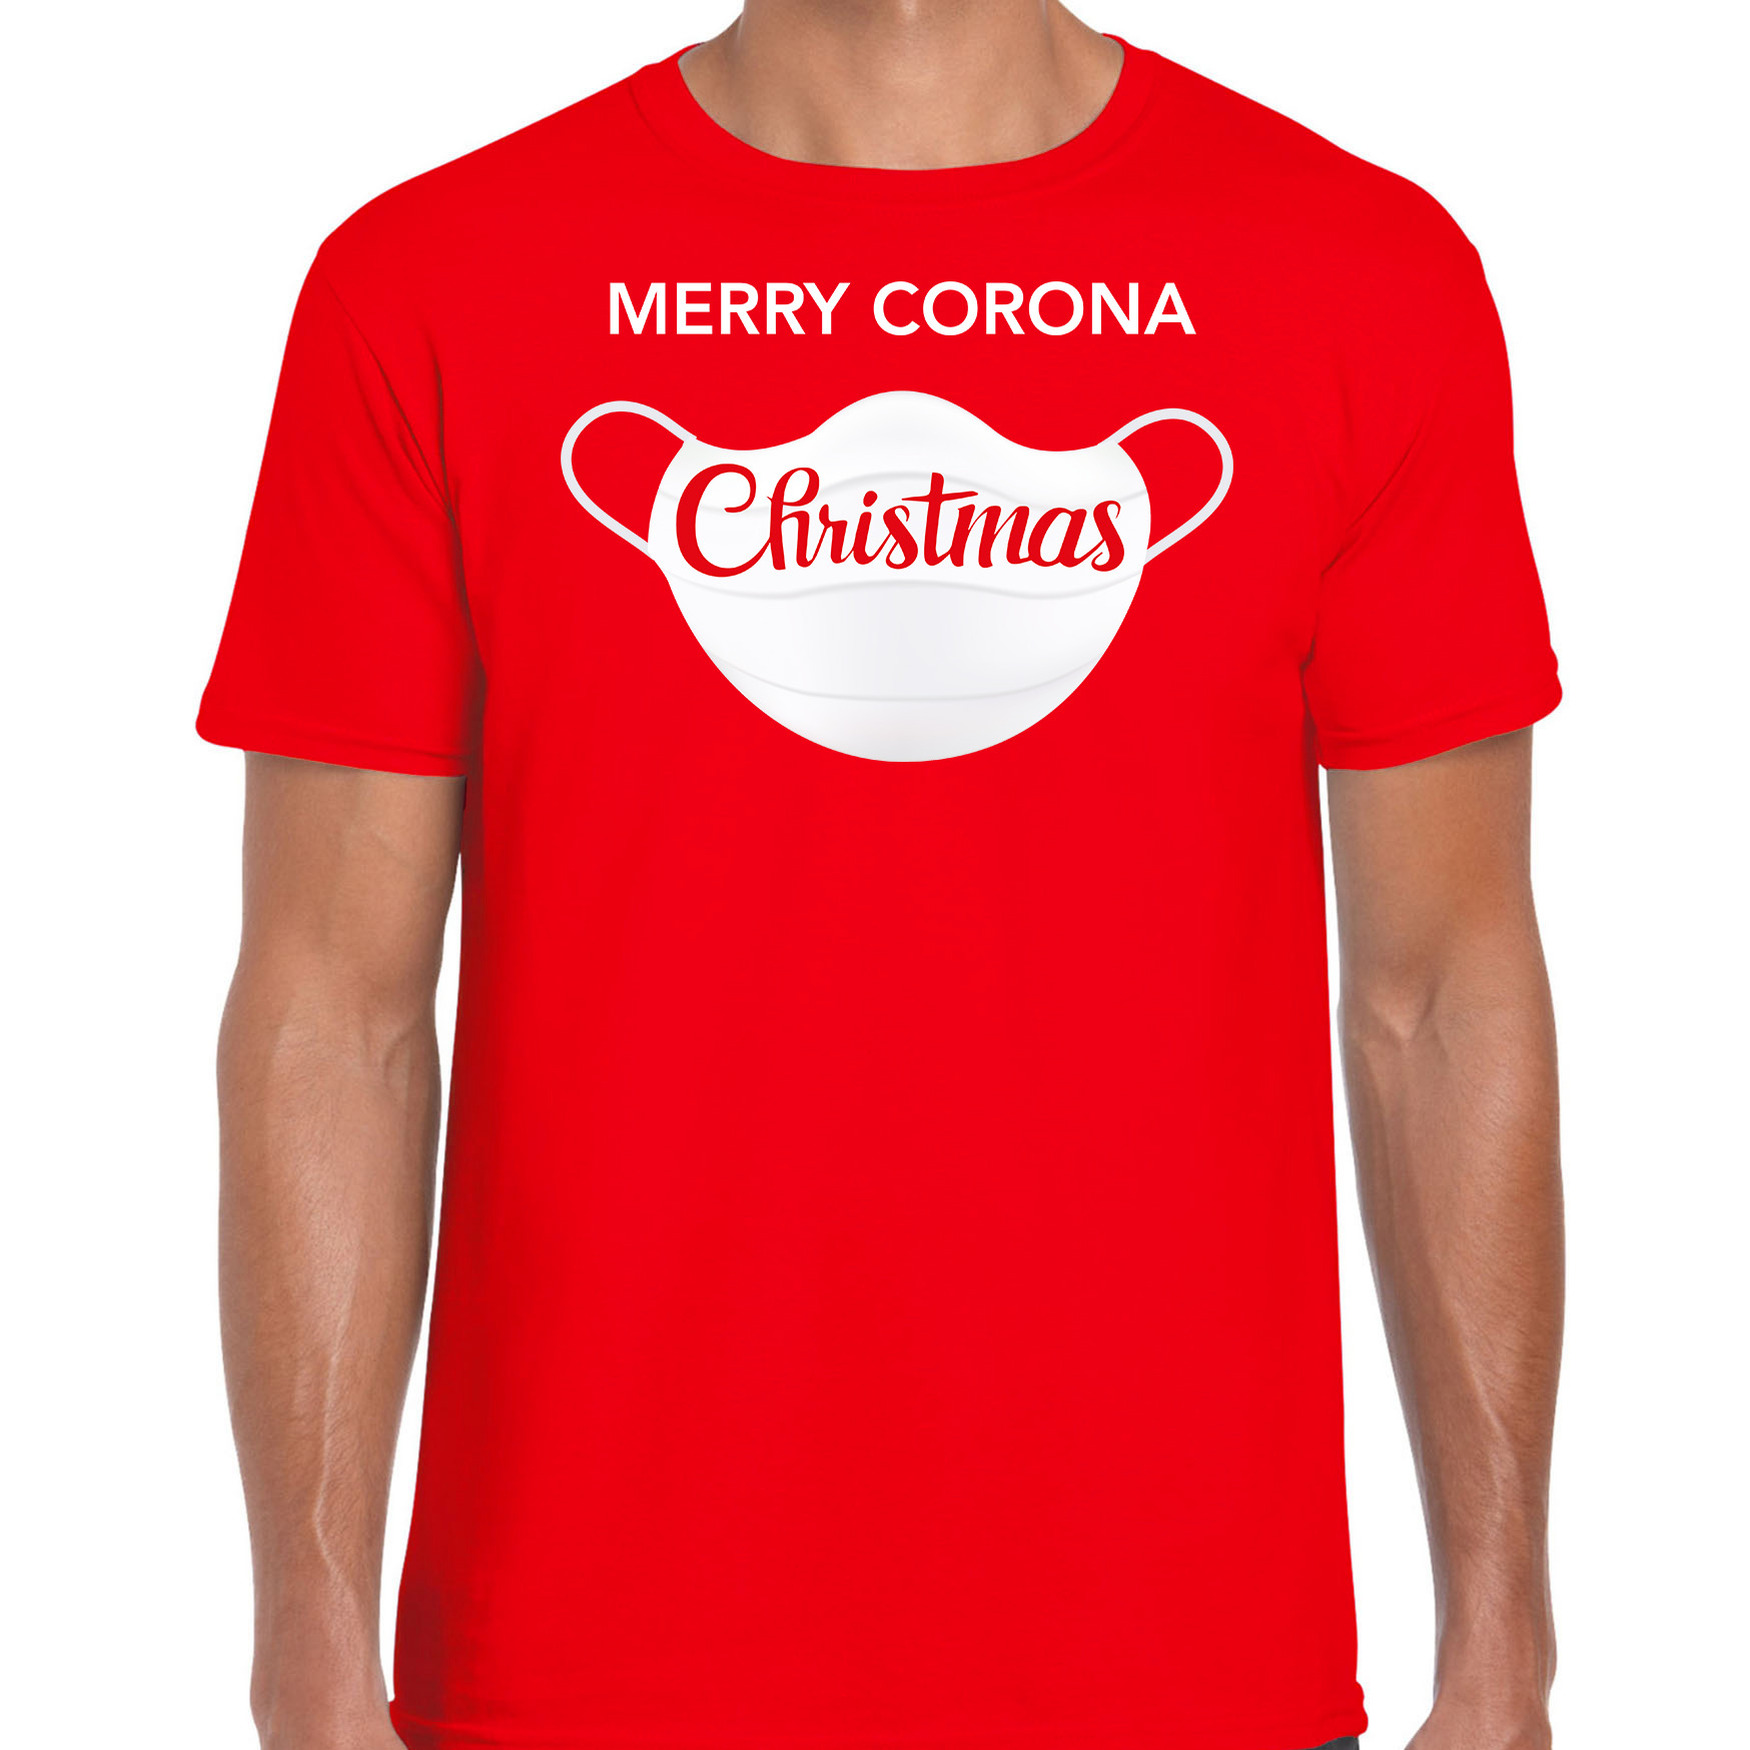 Merry corona Christmas fout Kerstshirt - outfit rood voor heren